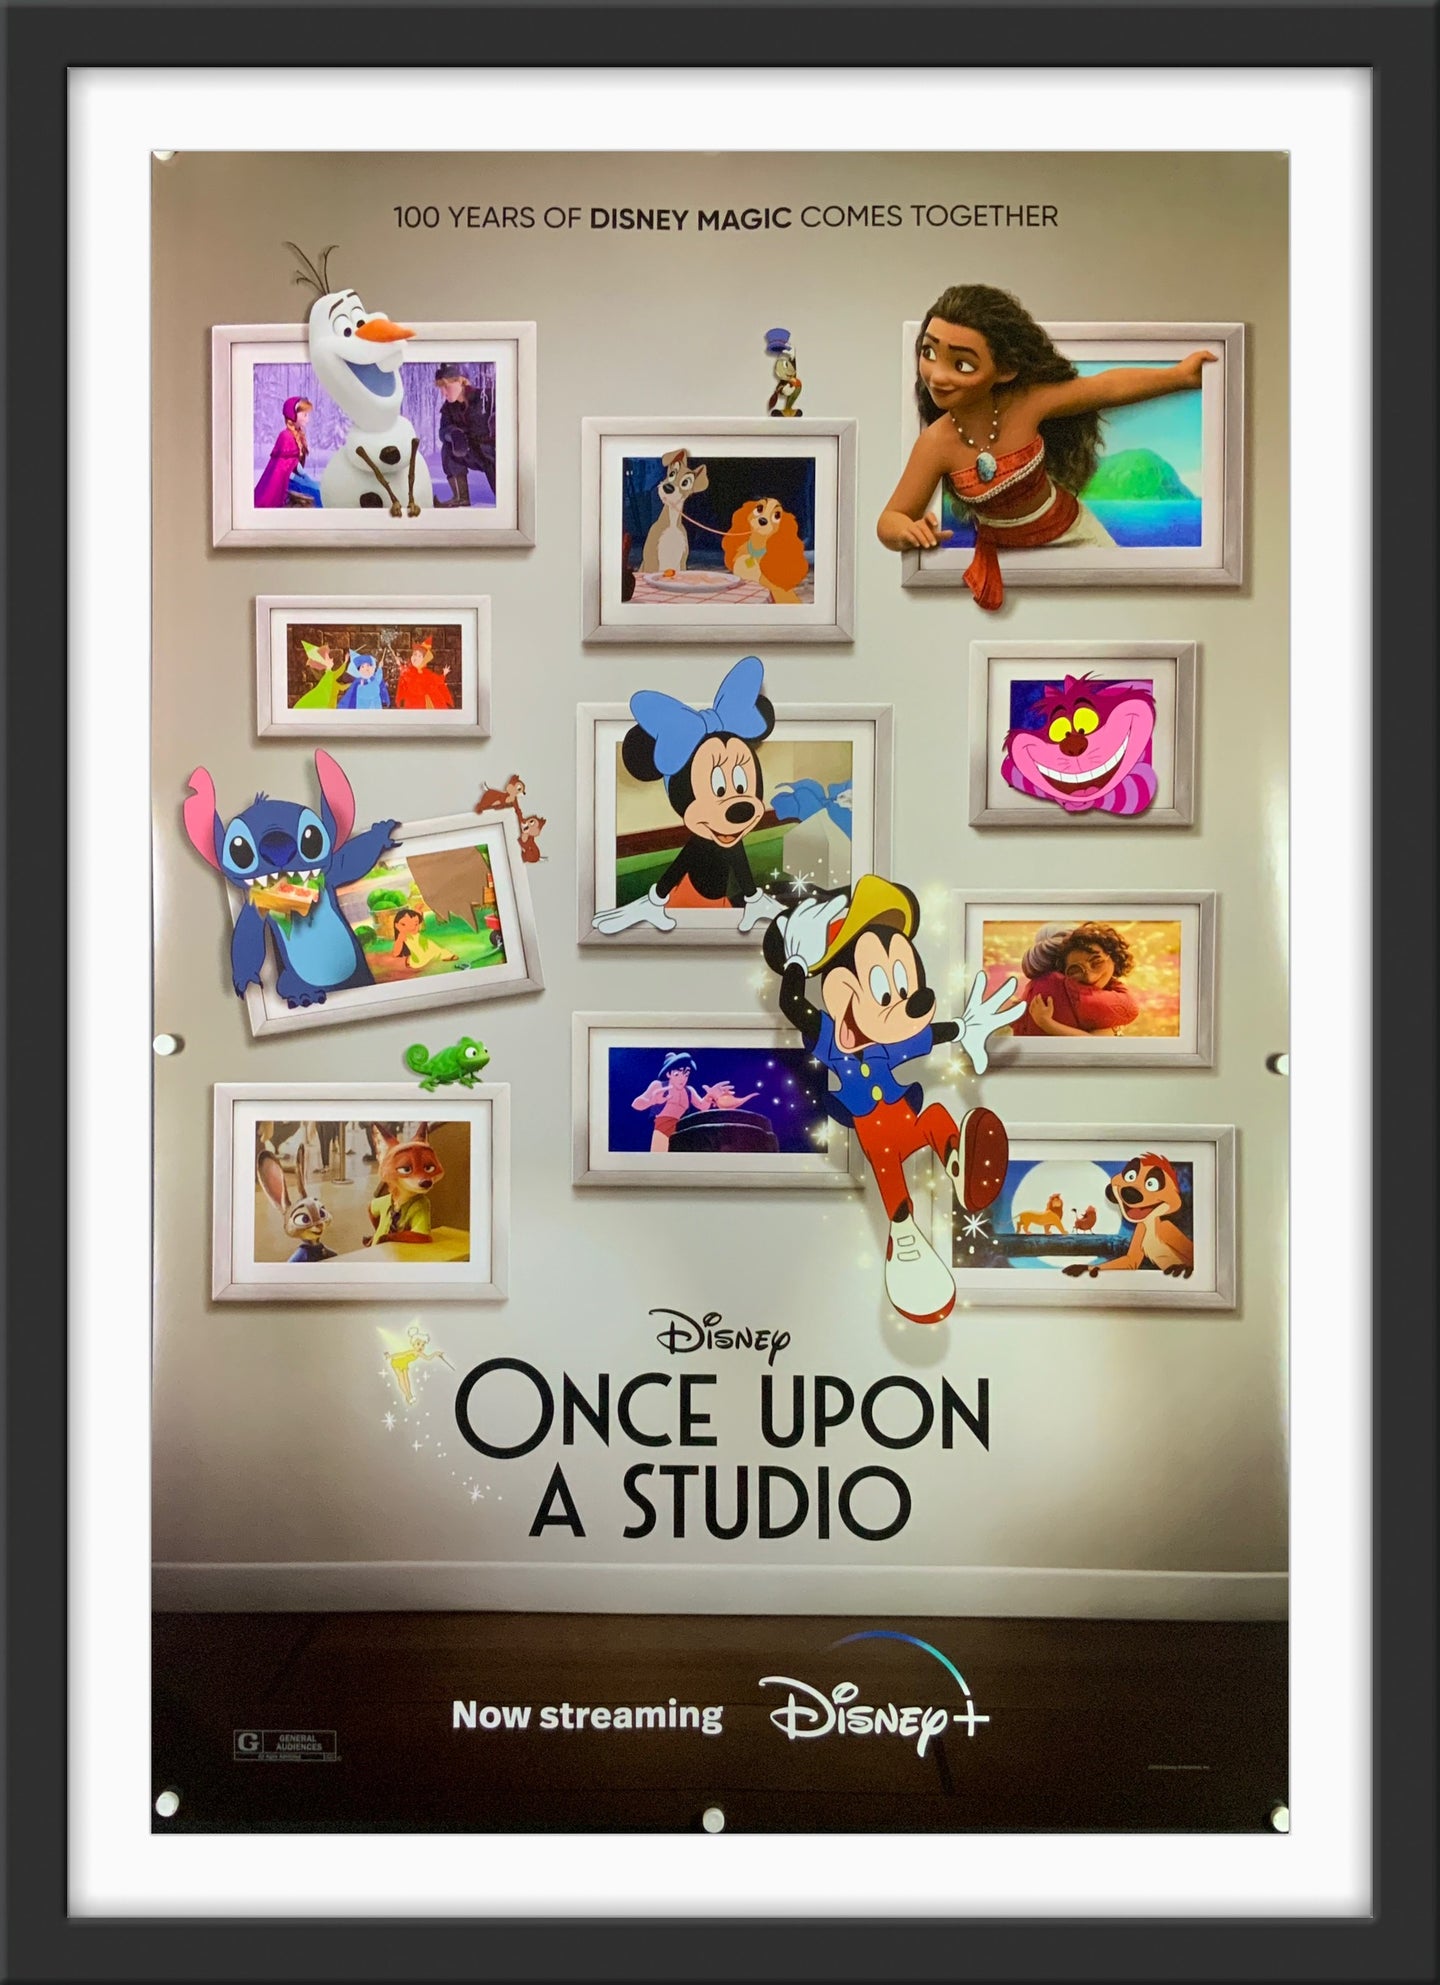 An original movie poster for the Disney+ film Once Upon A Studio